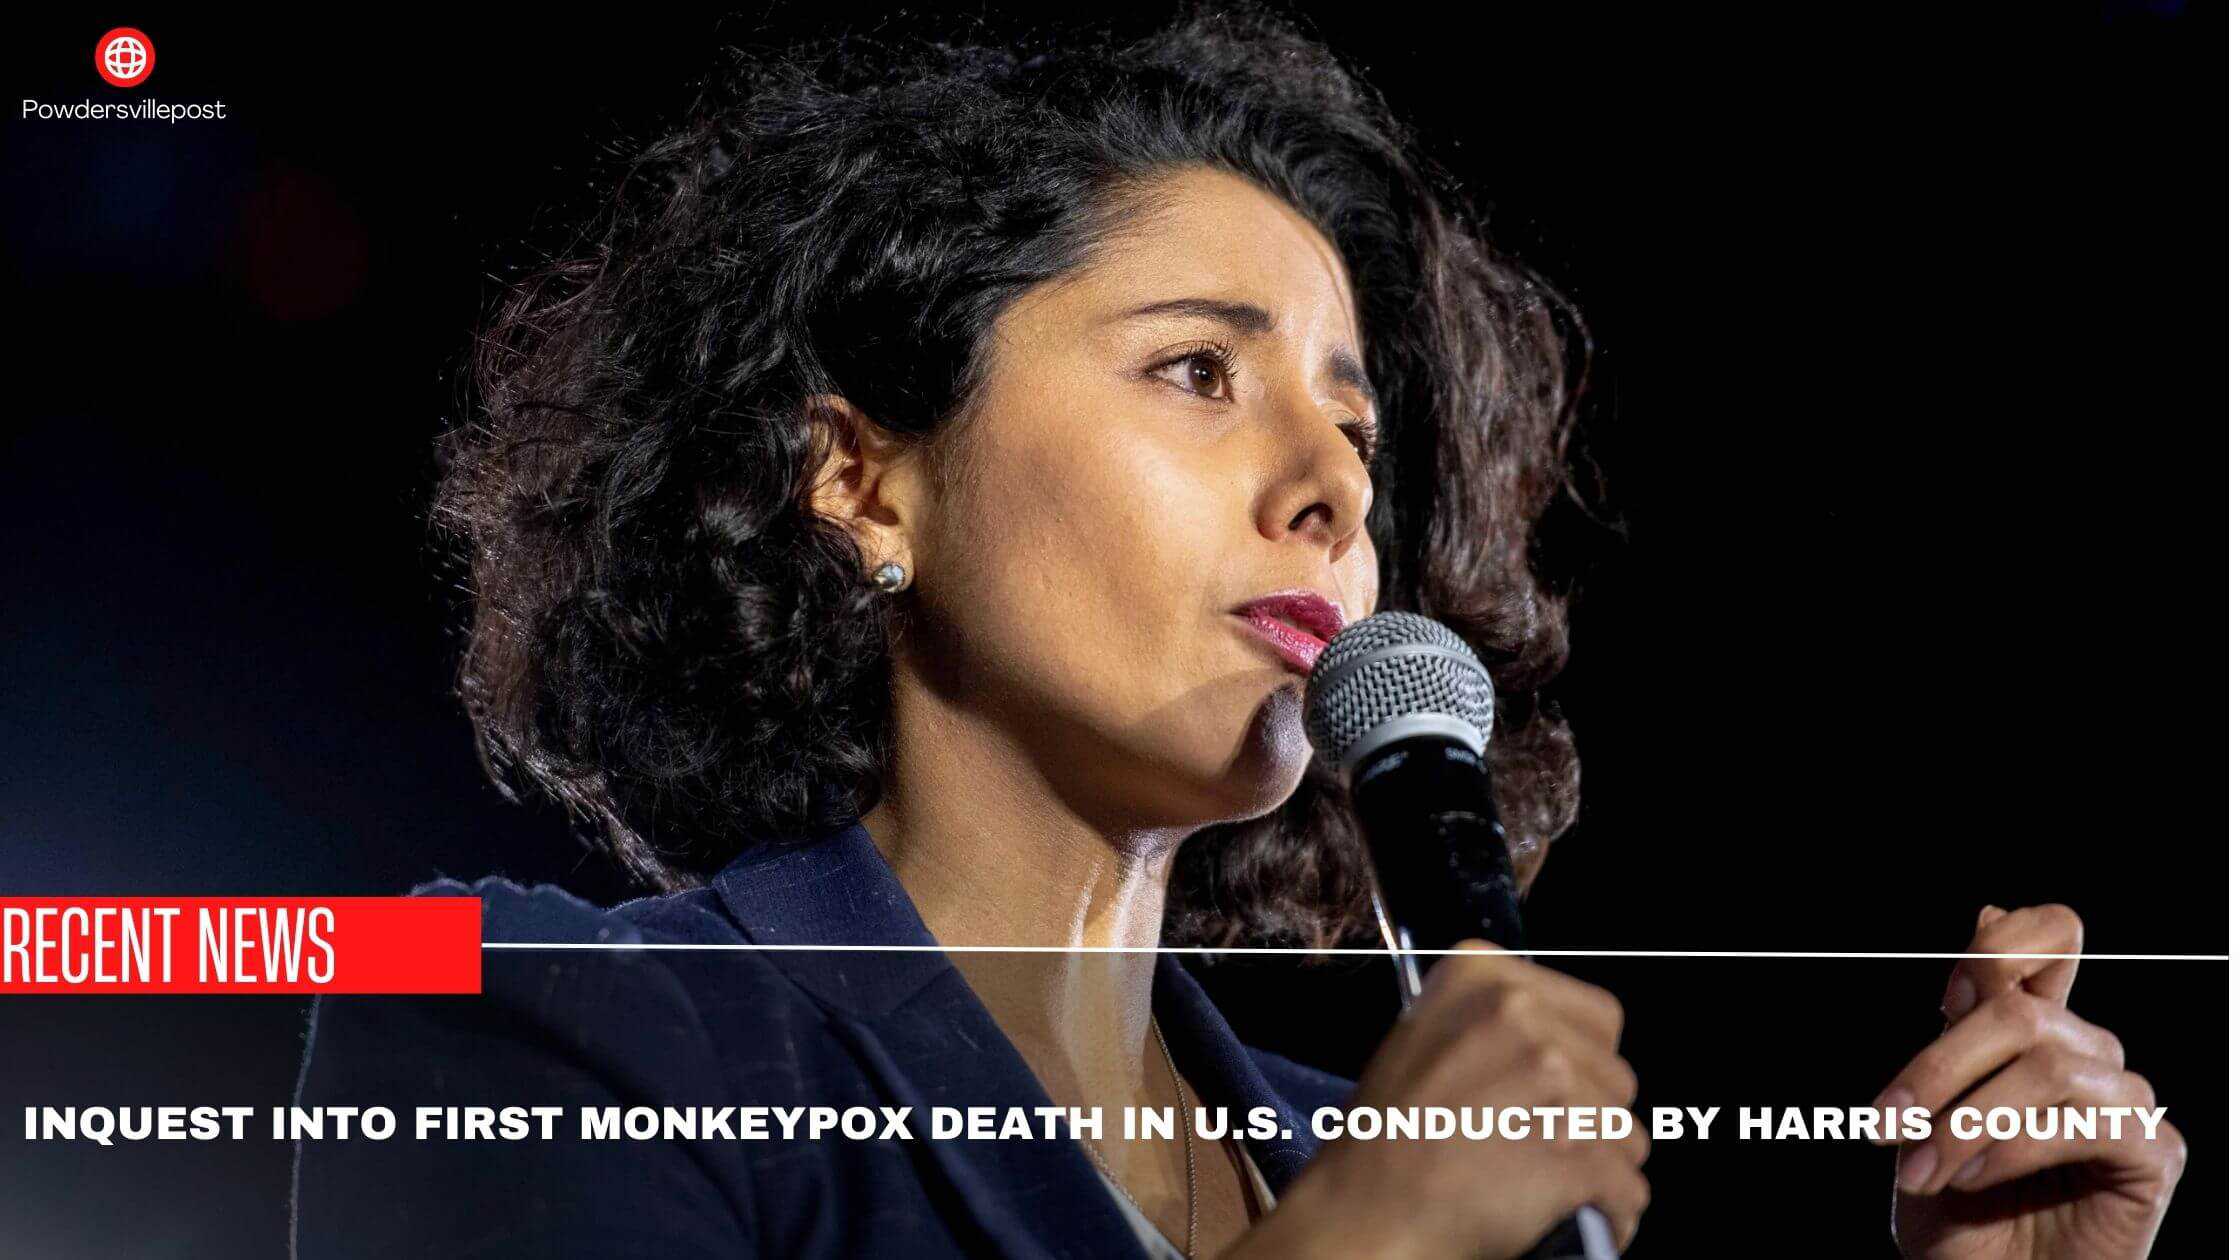 Inquest Into First Monkeypox Death In U.S. Conducted By Harris County 